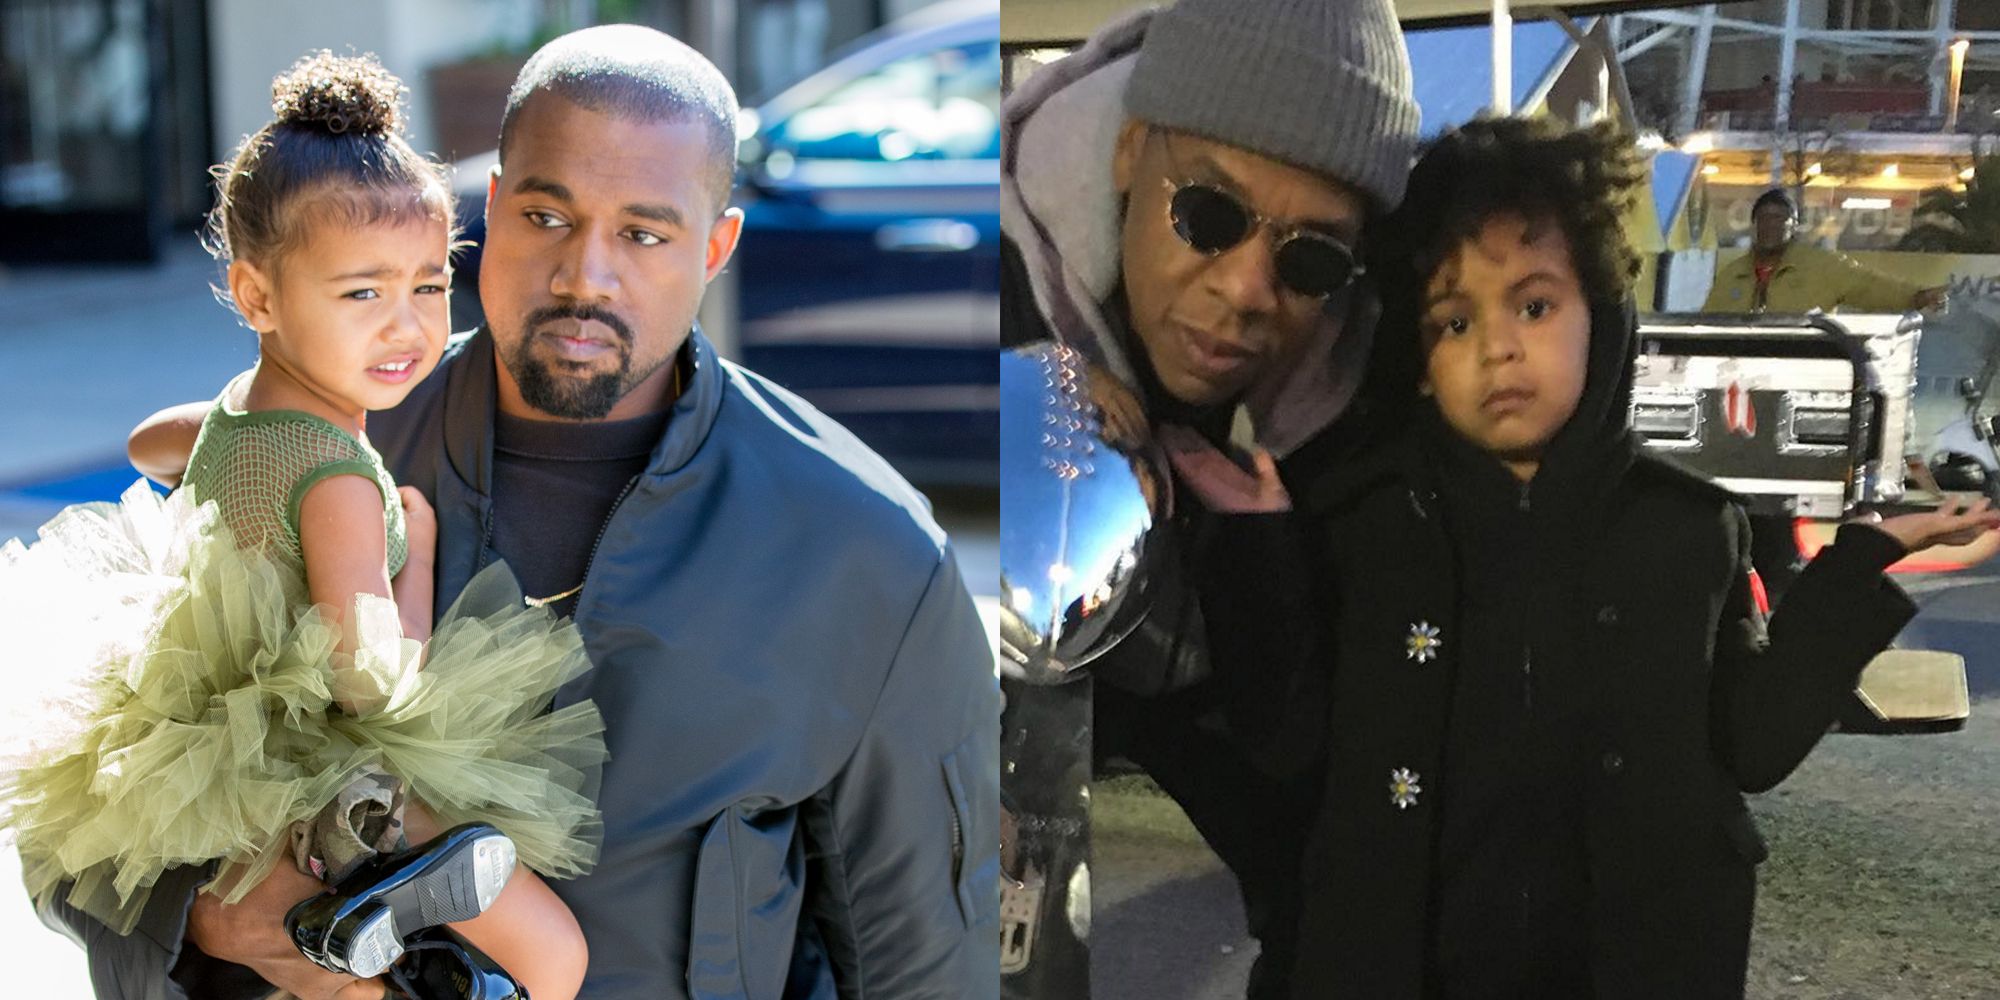 North West and Blue Ivy Carter Have Never “Played Together,” Says Kanye West